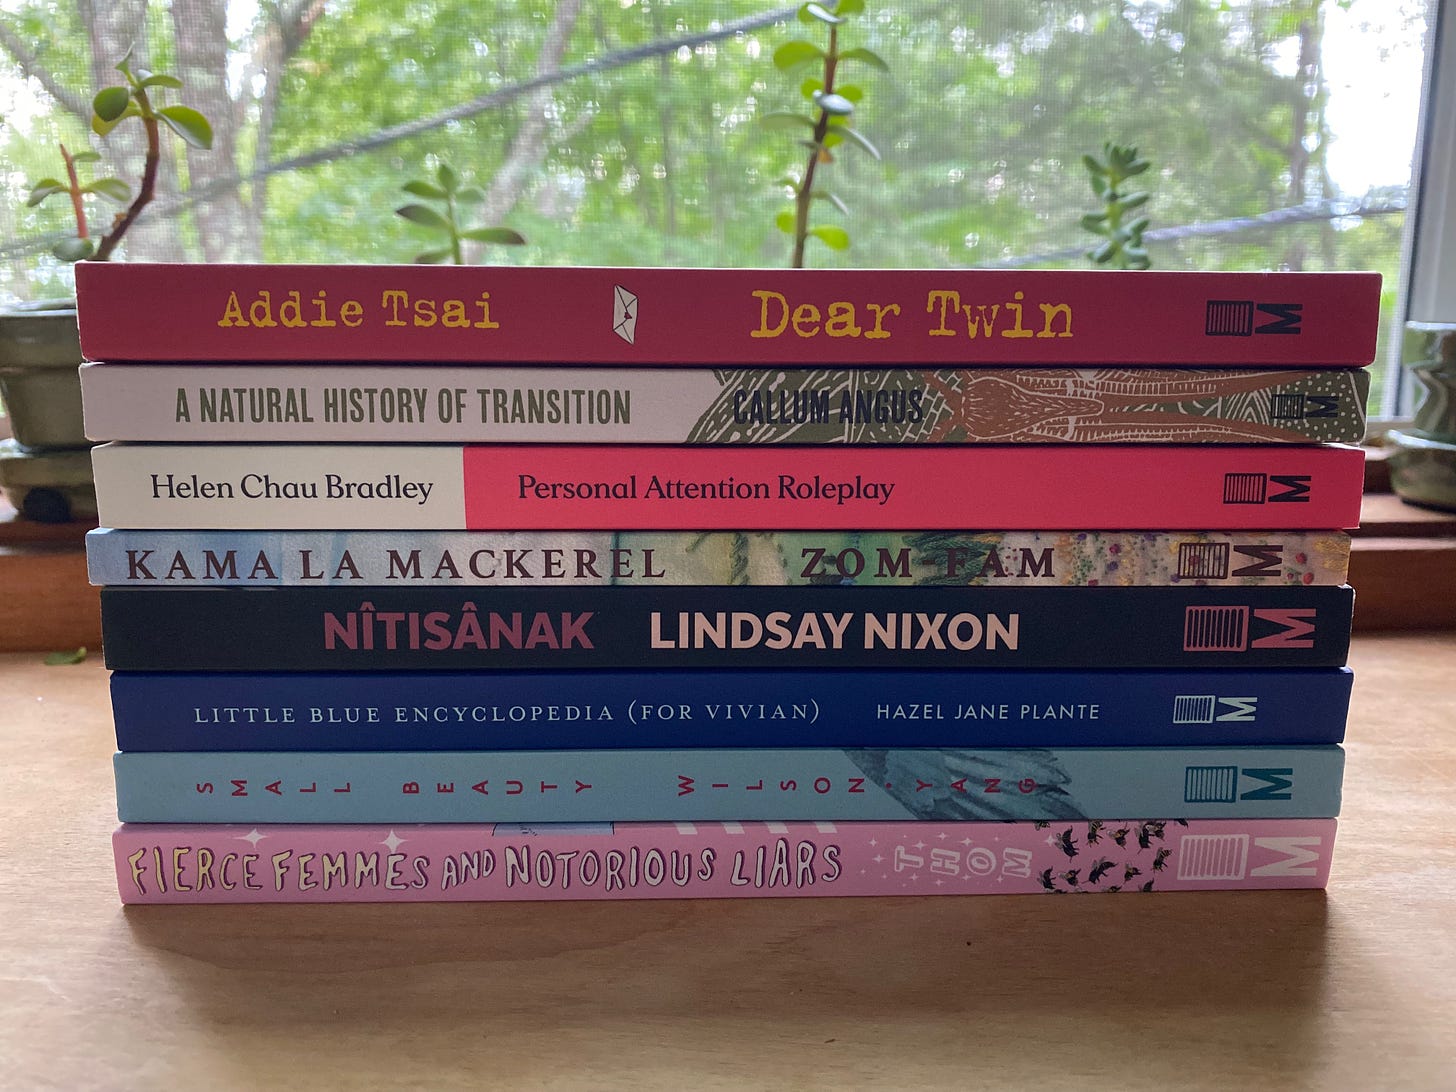 A stack of Metonymy Press titles on a wooden desk in front of a window. Books are: Dear Twin, A Natural History of Transition, Personal Attention Roleplay, Zom-Fam, Nîtisânak, Little Blue Encyclopedia (for Vivian), Small Beauty, and Fierce Femme and Notorious Liars.